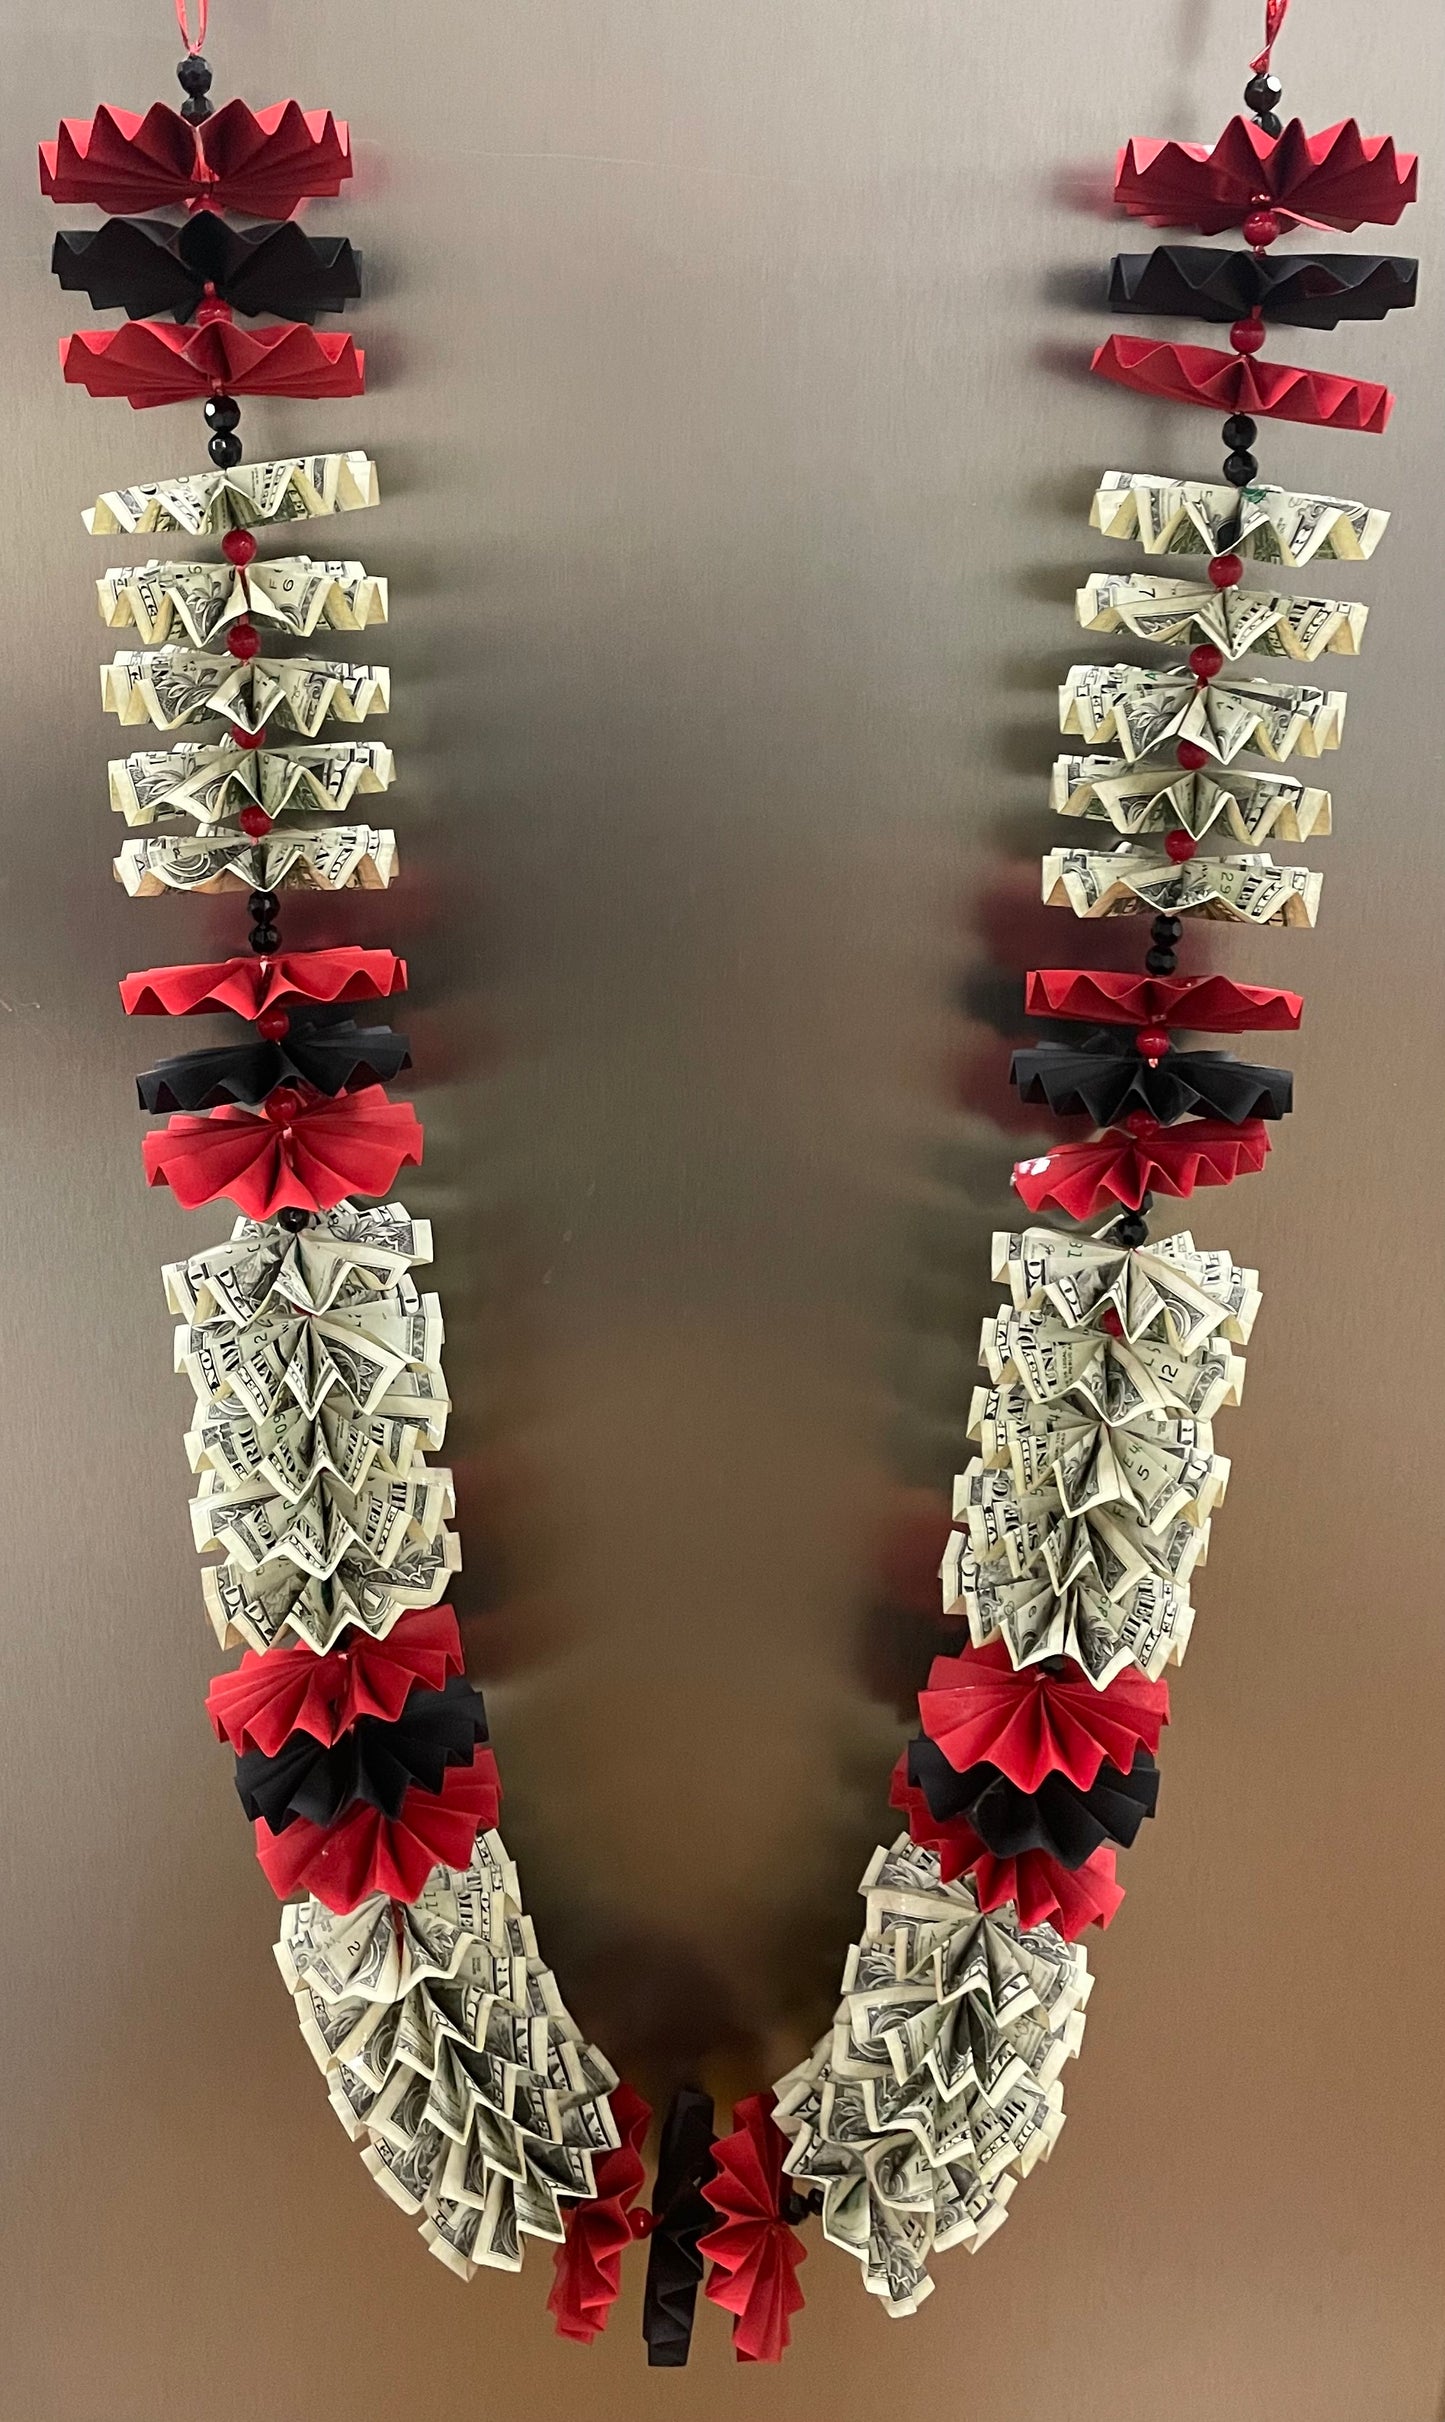 $30 in Cash Red and Black Graduation Money Lei